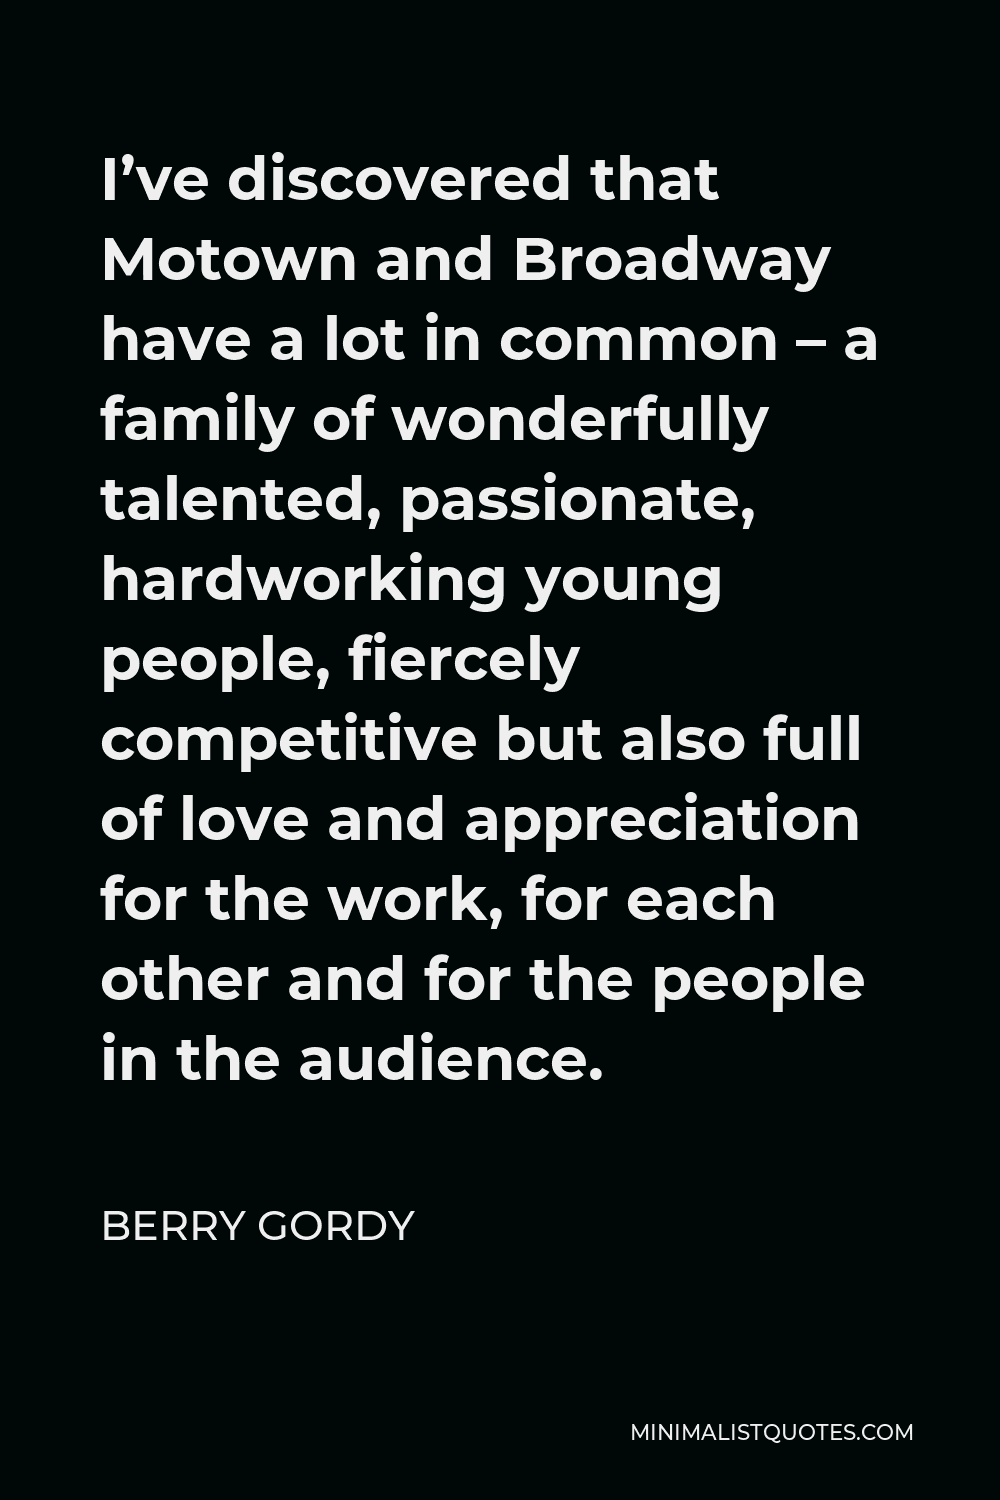 Berry Gordy Quote - I’ve discovered that Motown and Broadway have a lot in common – a family of wonderfully talented, passionate, hardworking young people, fiercely competitive but also full of love and appreciation for the work, for each other and for the people in the audience.